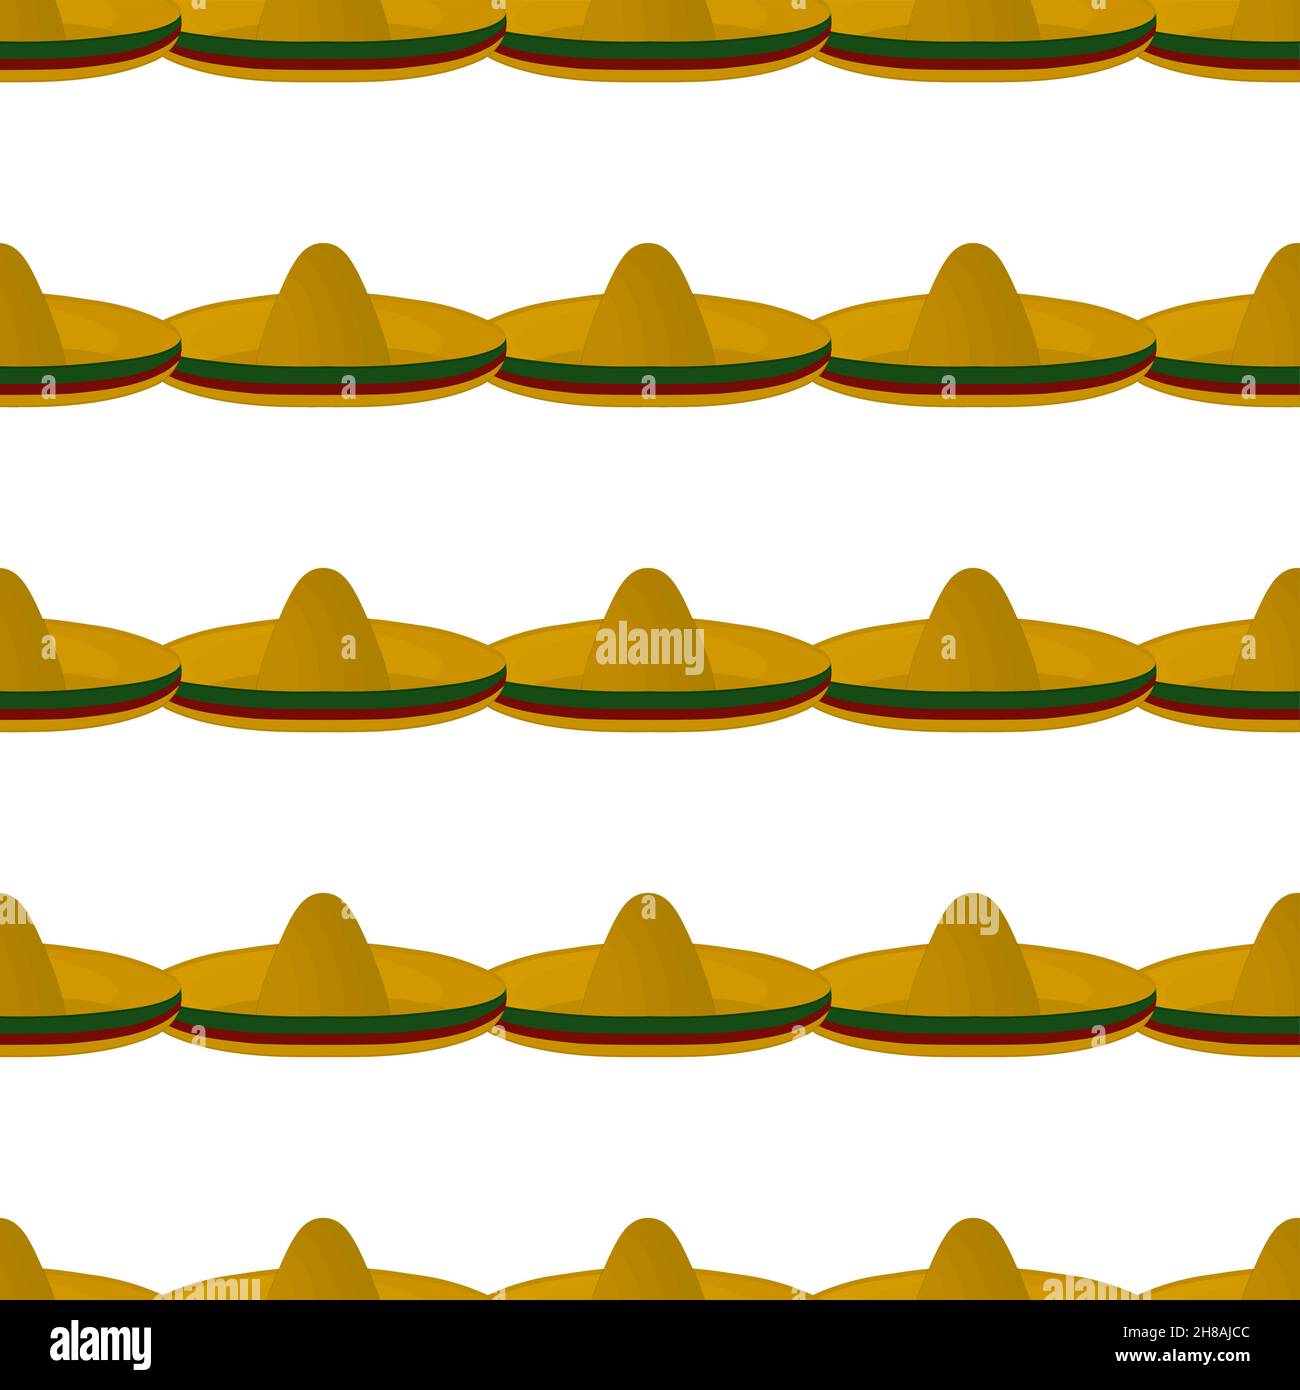 Pattern mexican hats sombrero, beautiful caps in white background. Caps pattern consisting of collection mexican hats sombrero for wearing. Pattern of Stock Vector